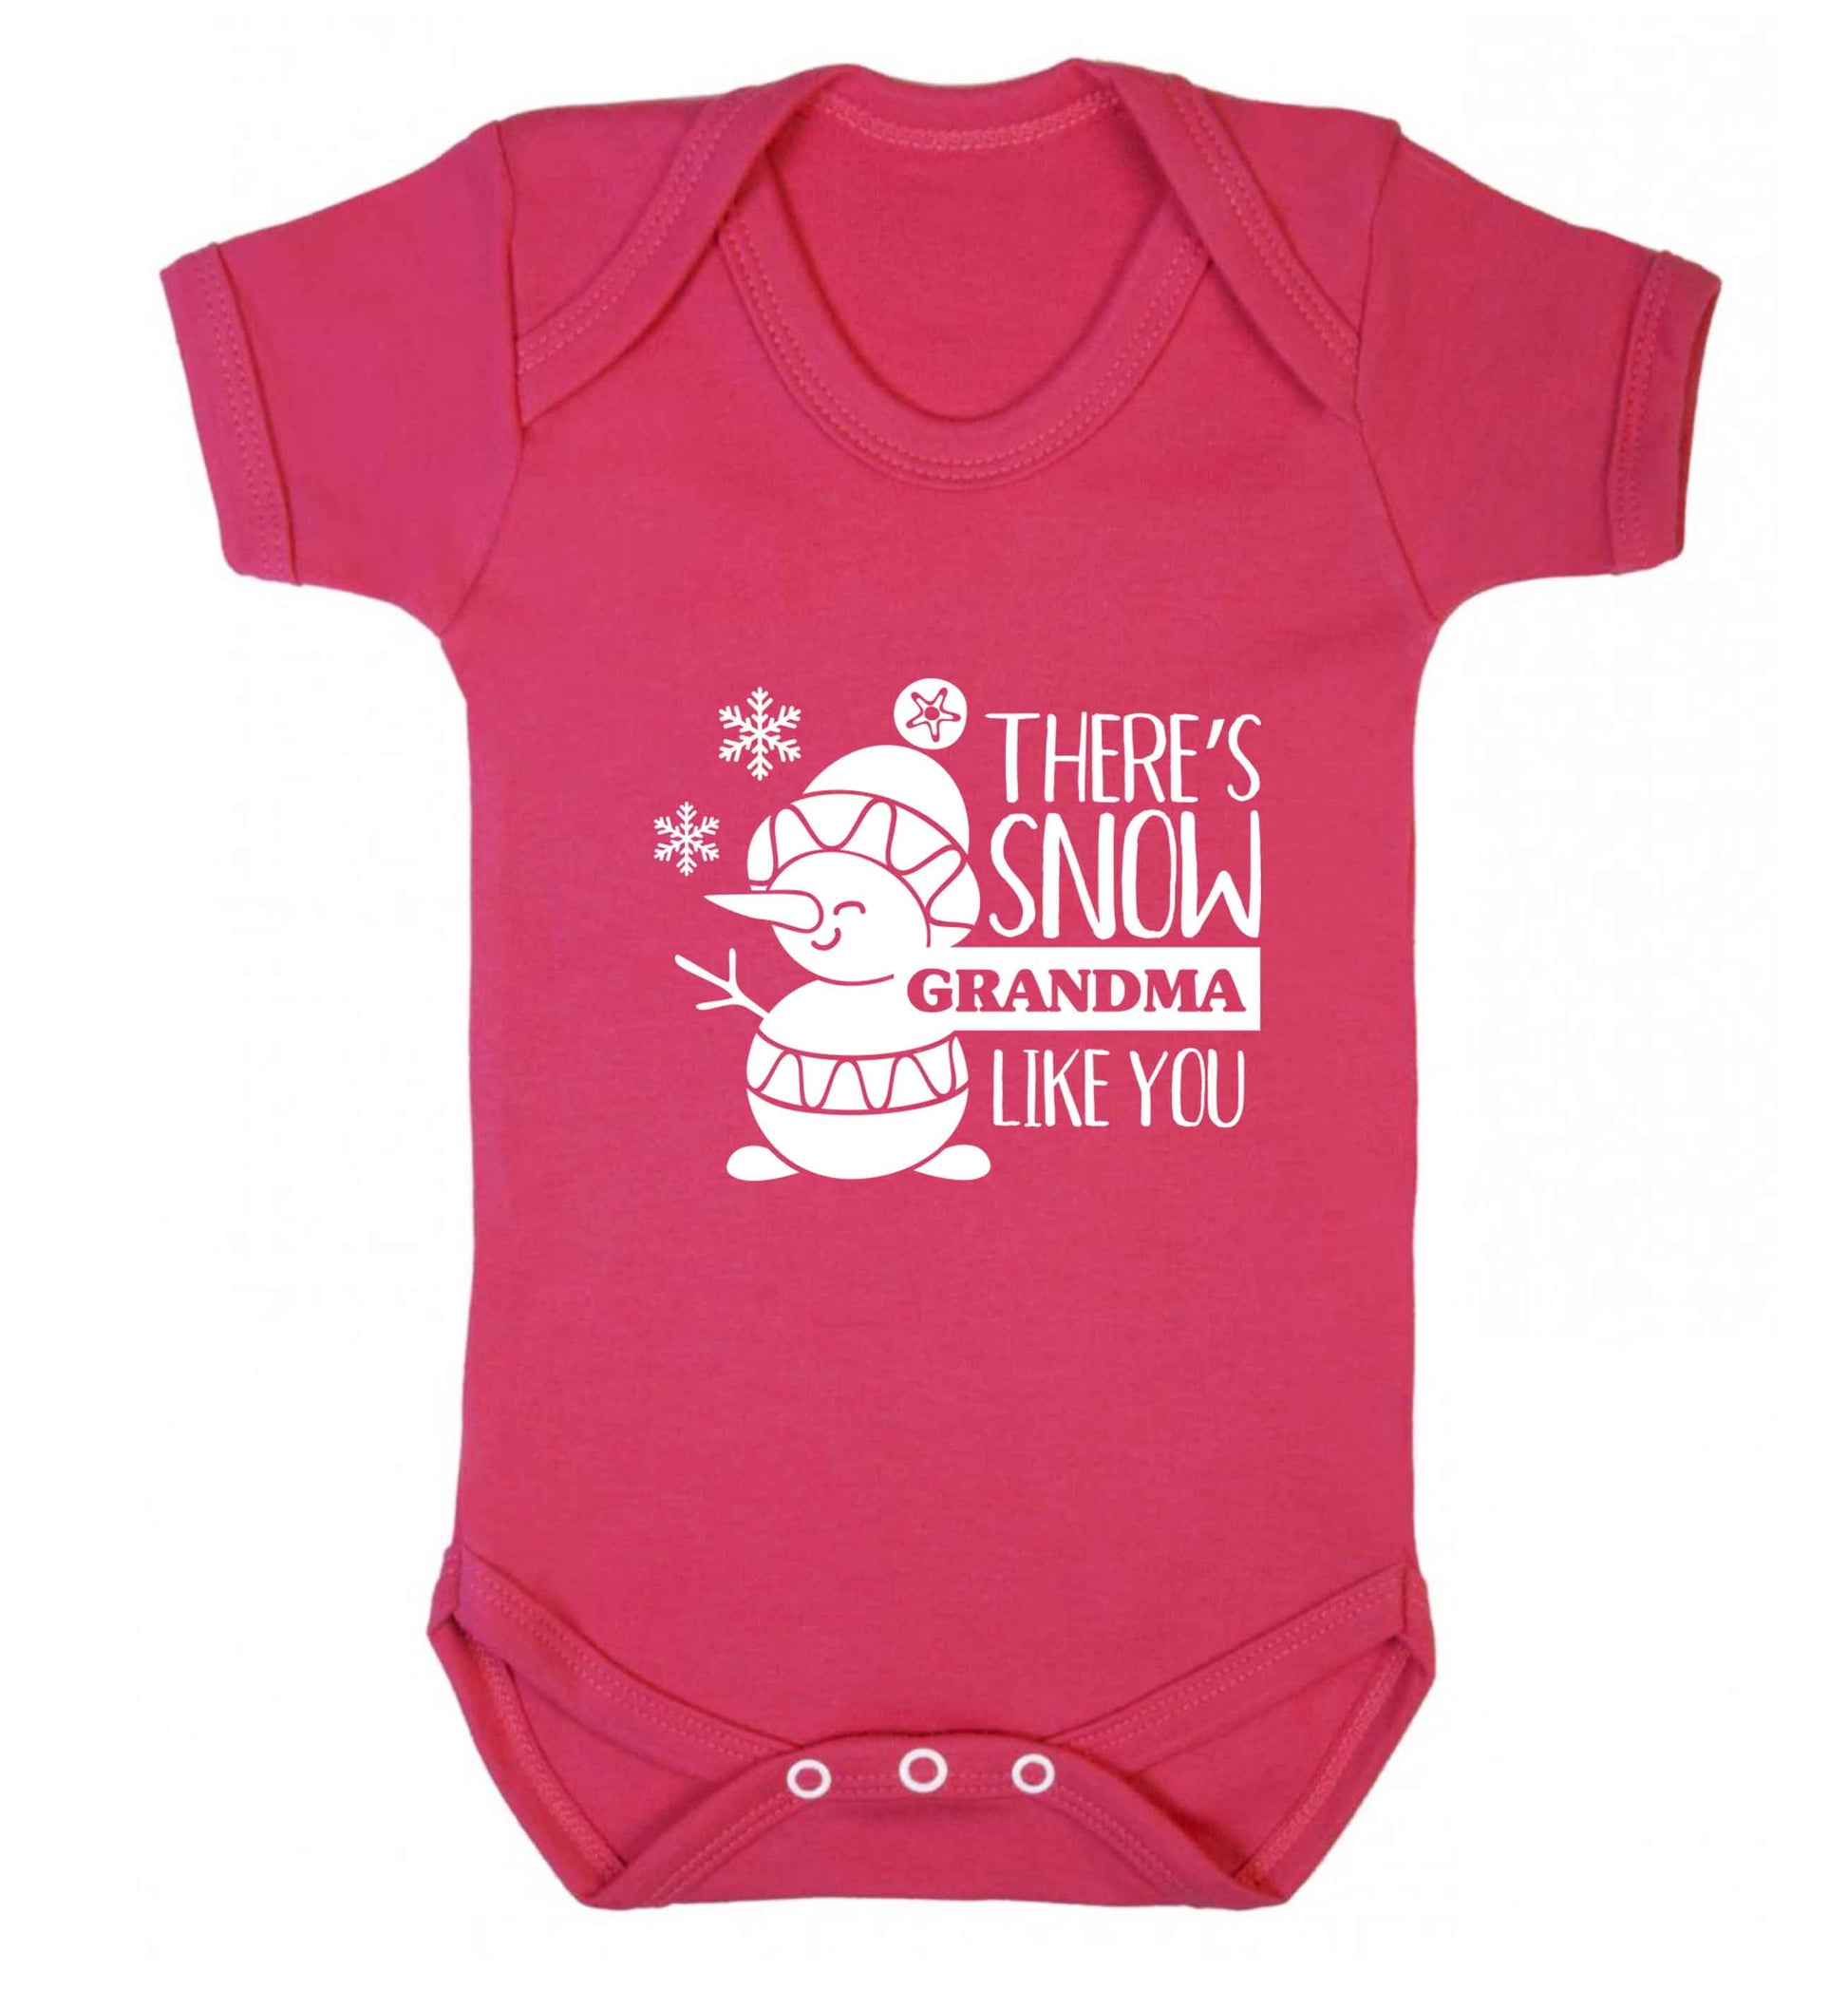 There's snow grandma like you baby vest dark pink 18-24 months